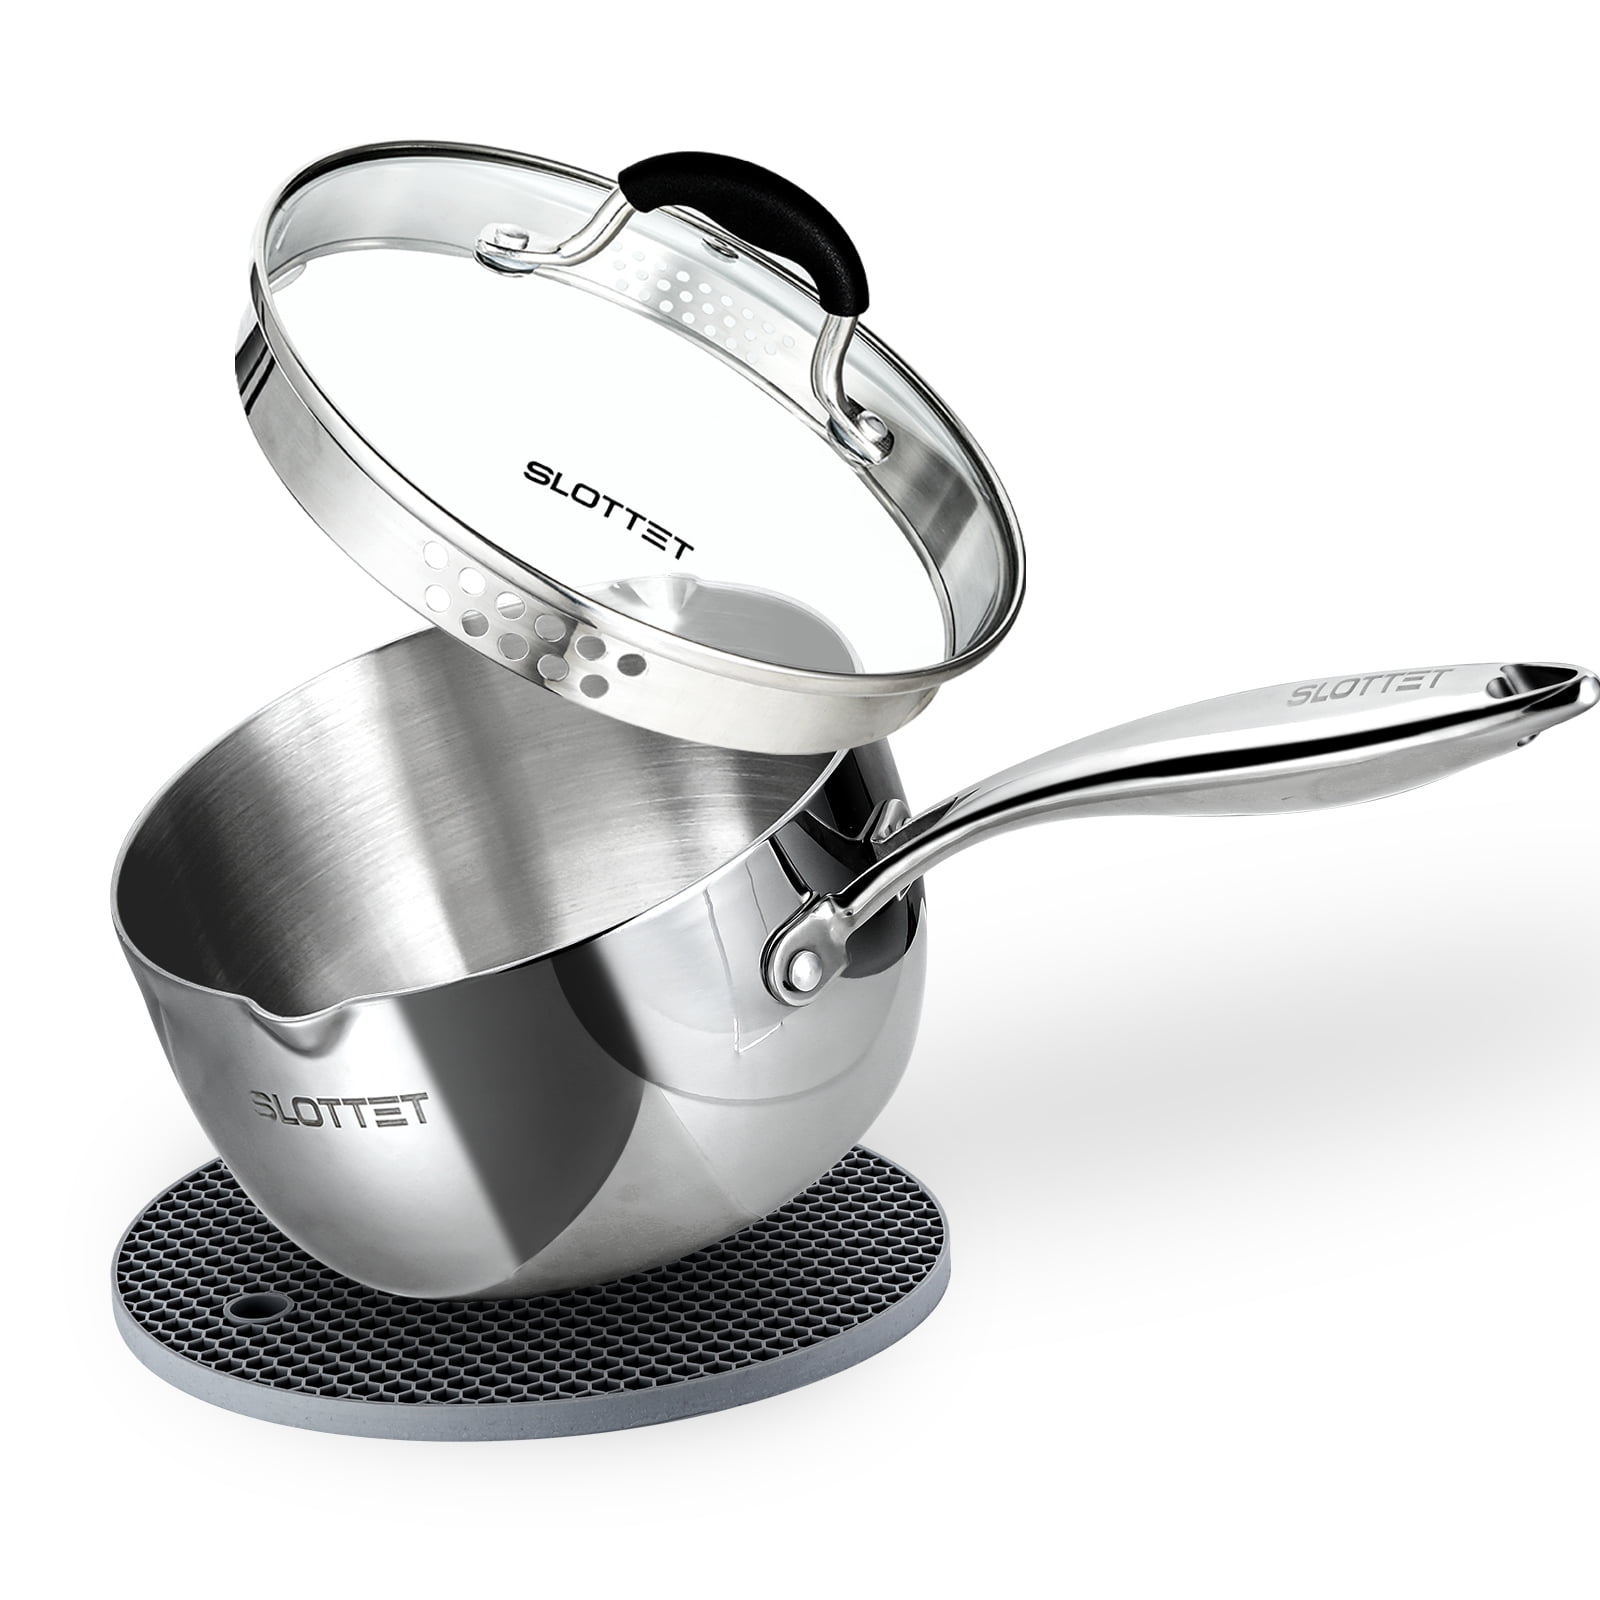 SLOTTET Tri-Ply Whole-Clad Stainless Steel Sauce Pan with Pour Spout ,2 ...